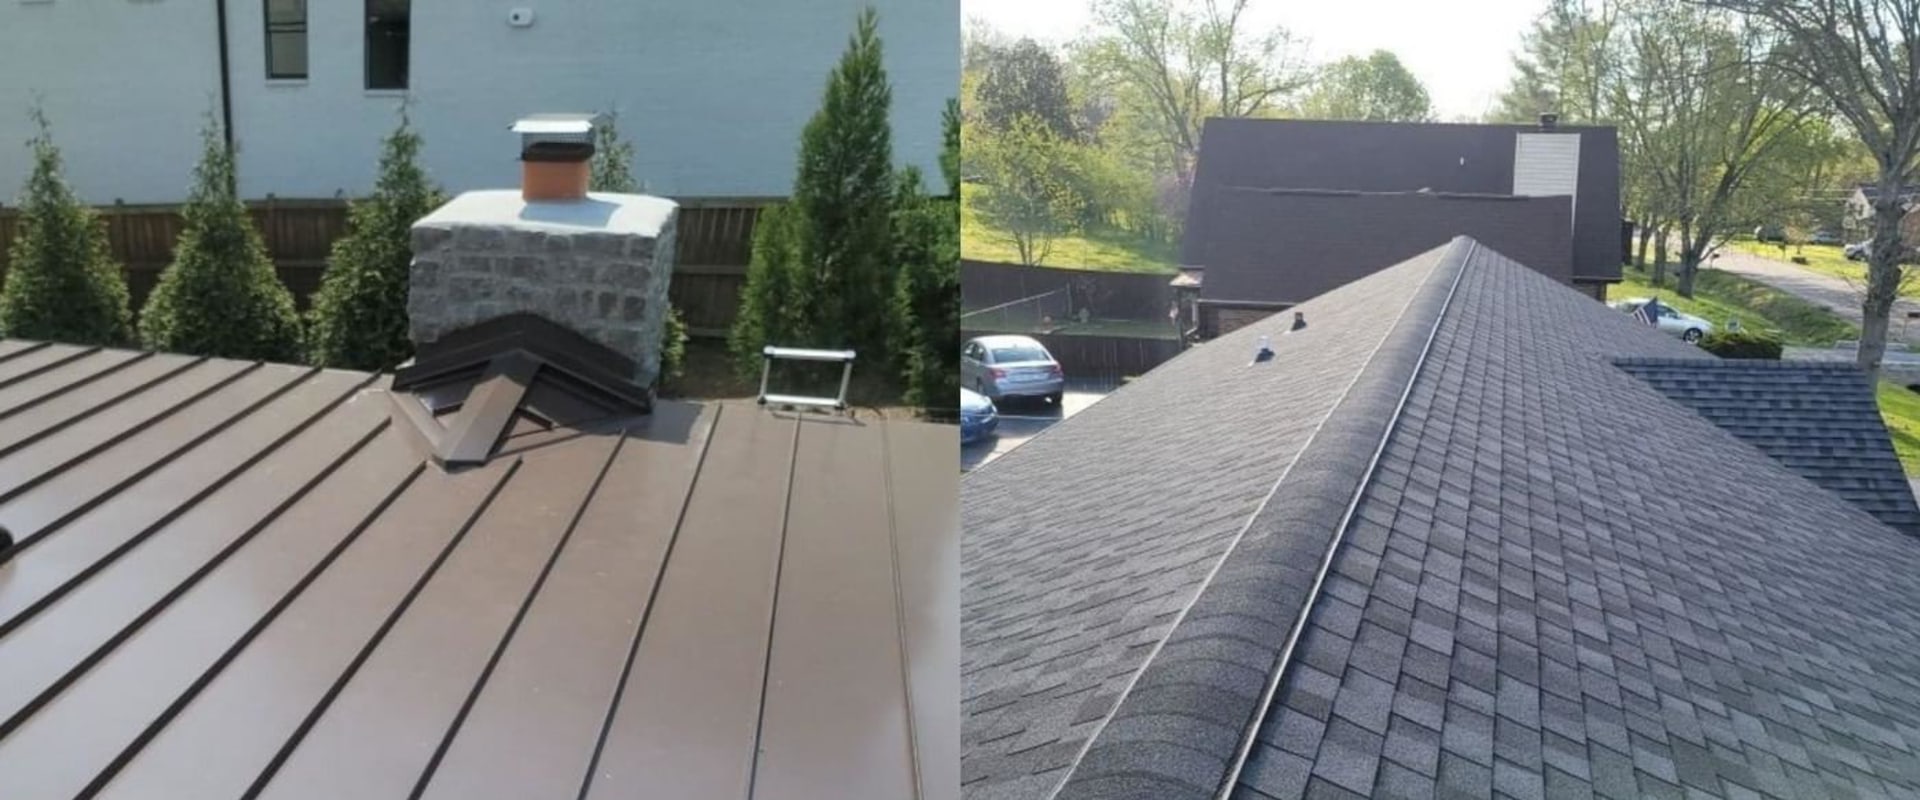 How much more expensive is a metal roof compared to shingles?